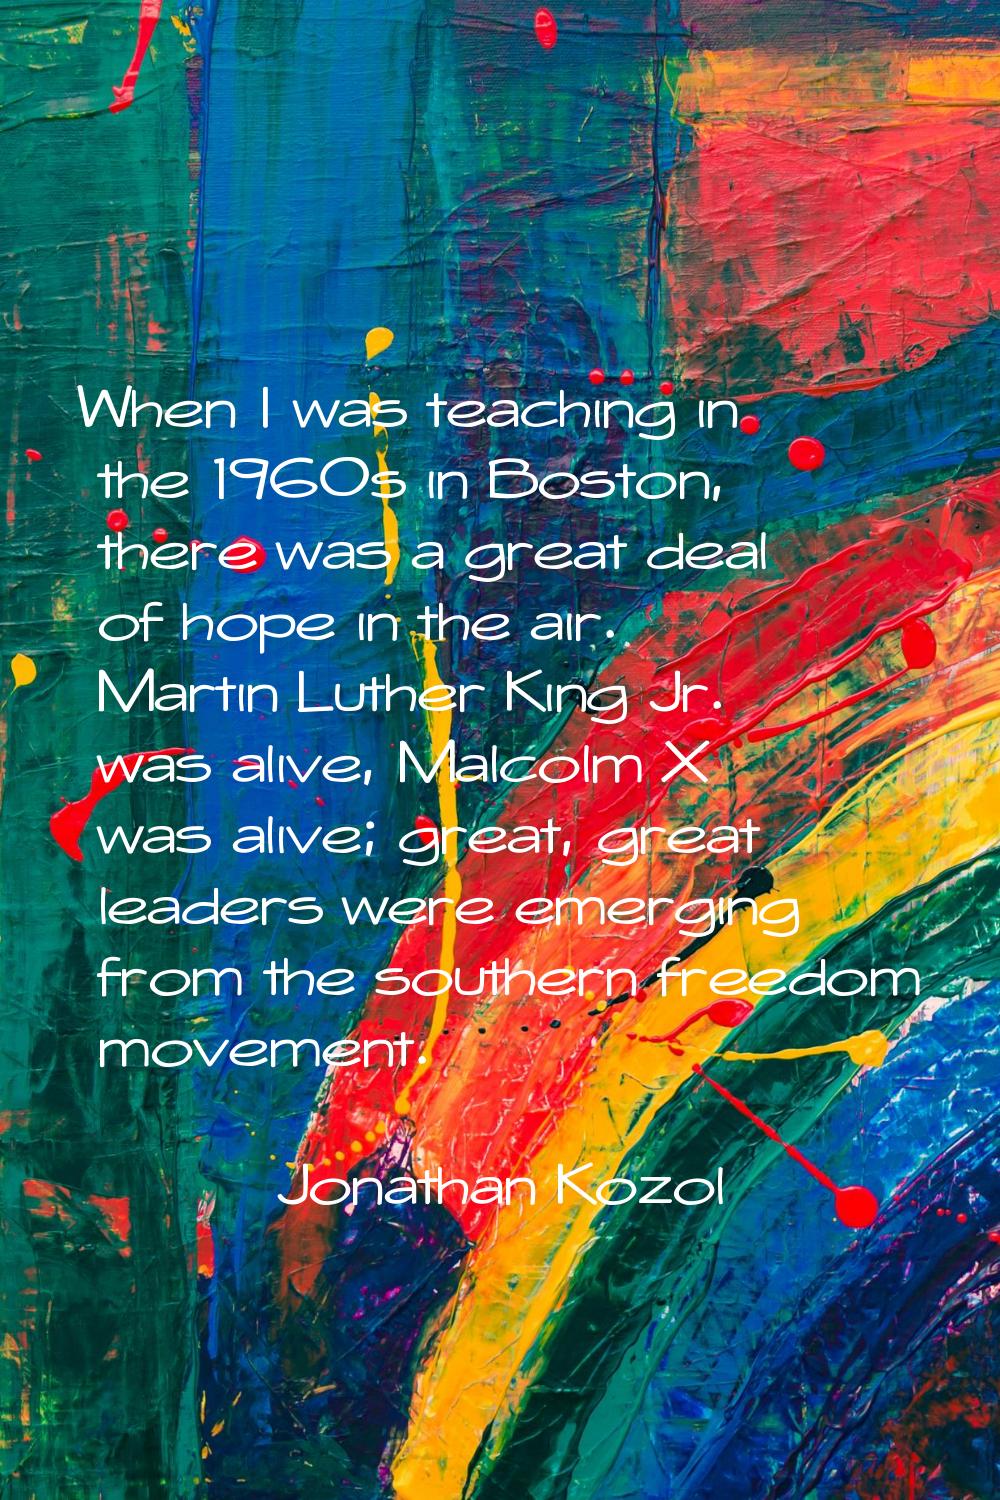 When I was teaching in the 1960s in Boston, there was a great deal of hope in the air. Martin Luthe